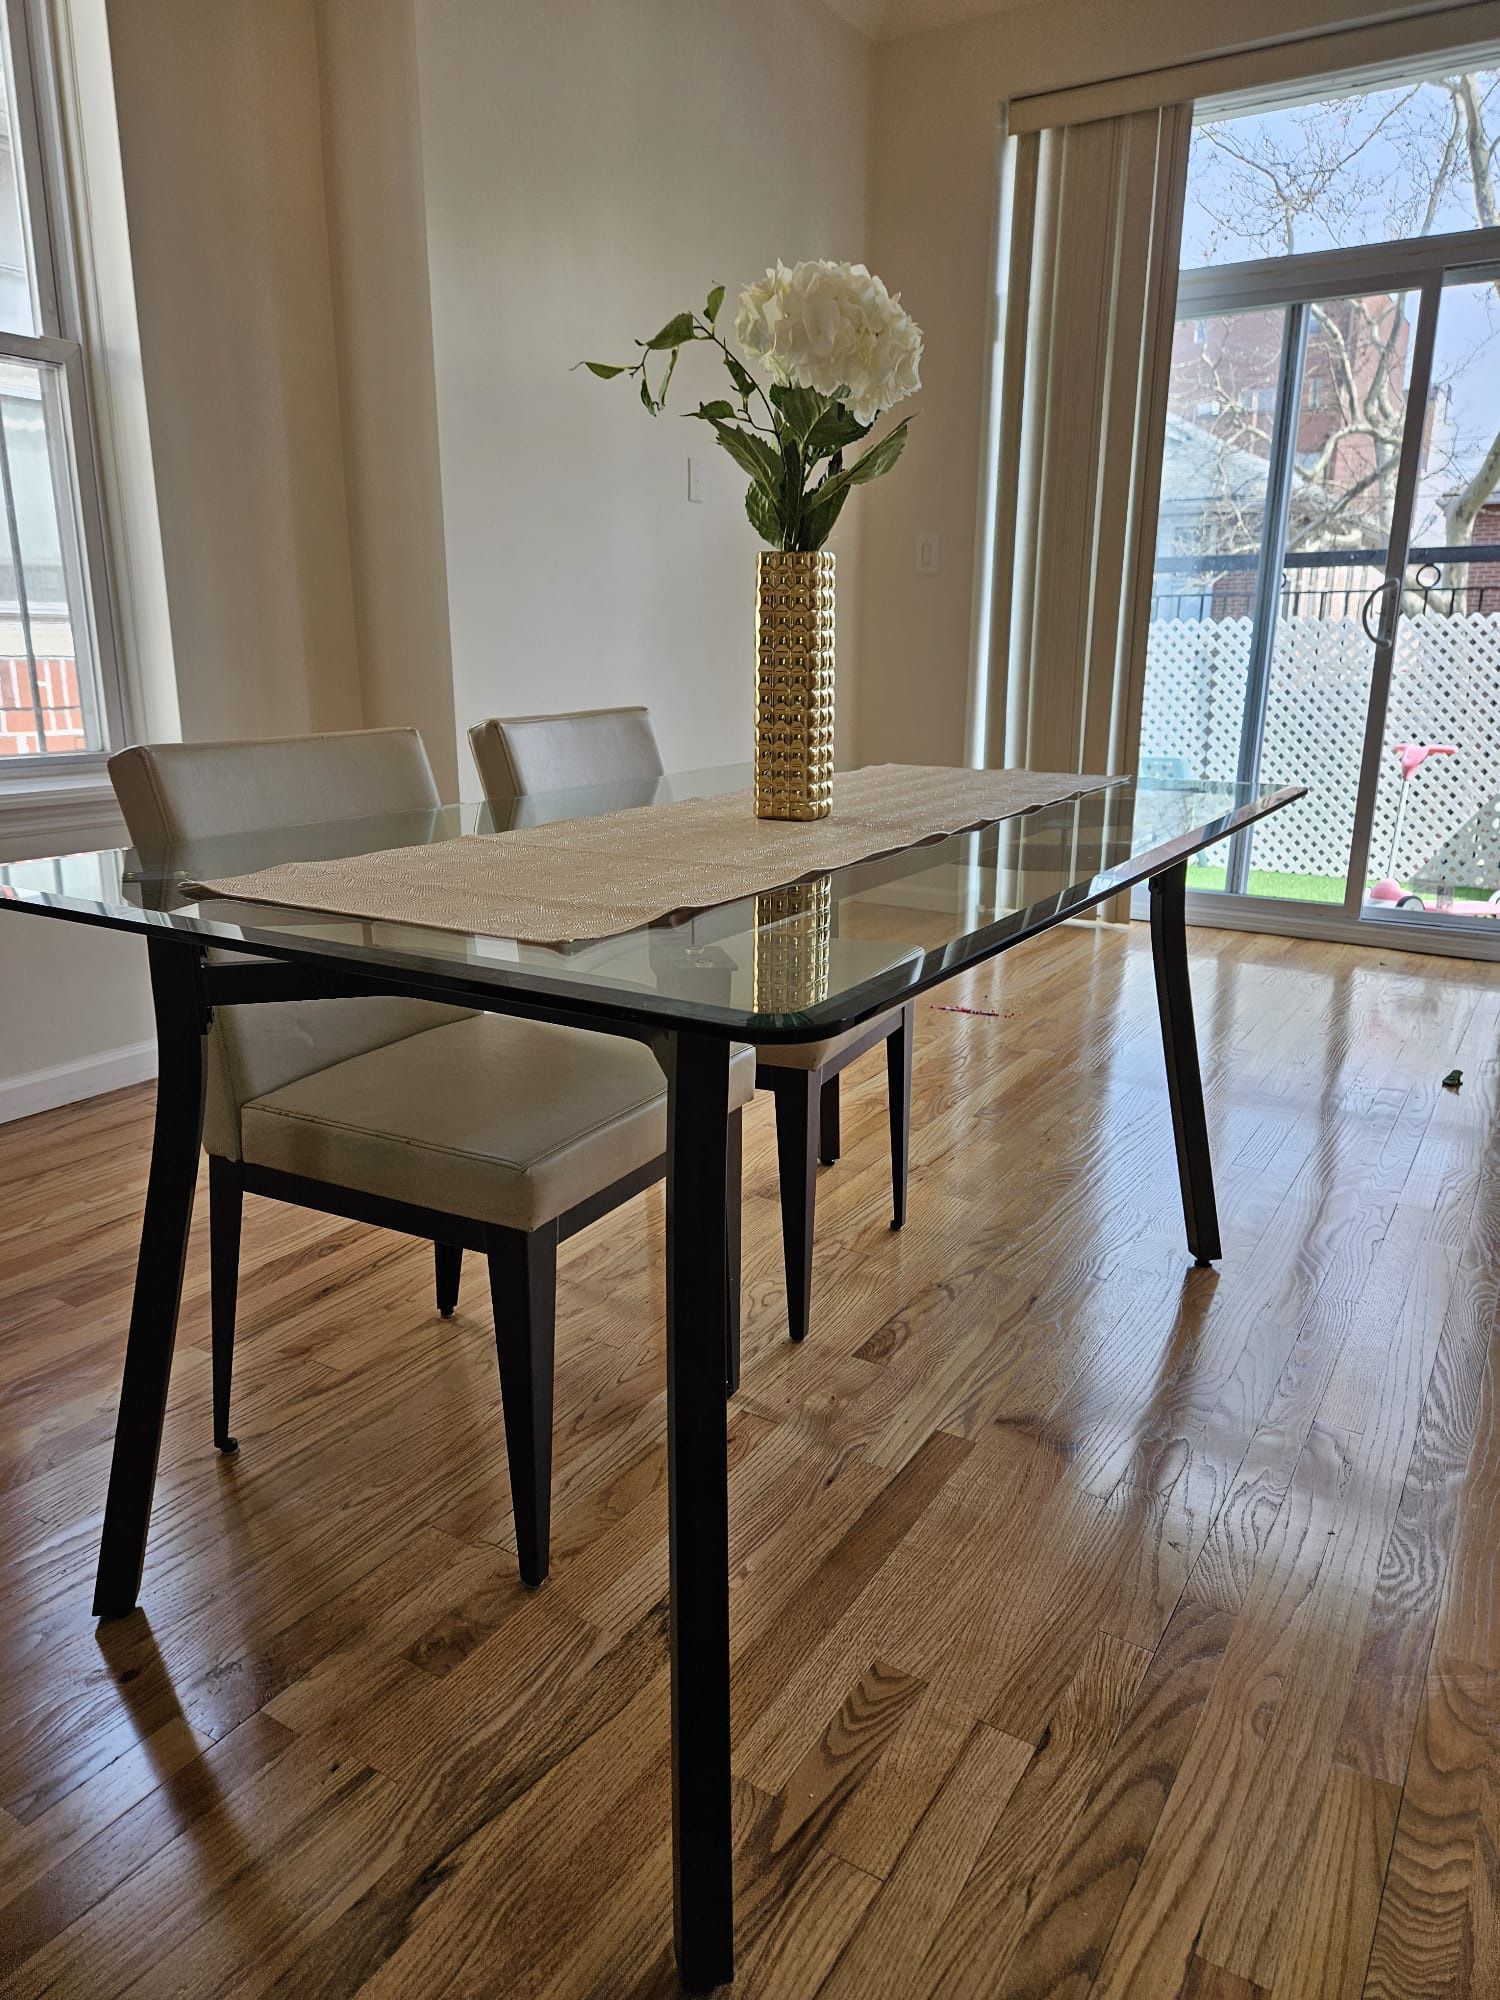 3ft x 5ft glass table with 4 leather chairs. Amisco brand  